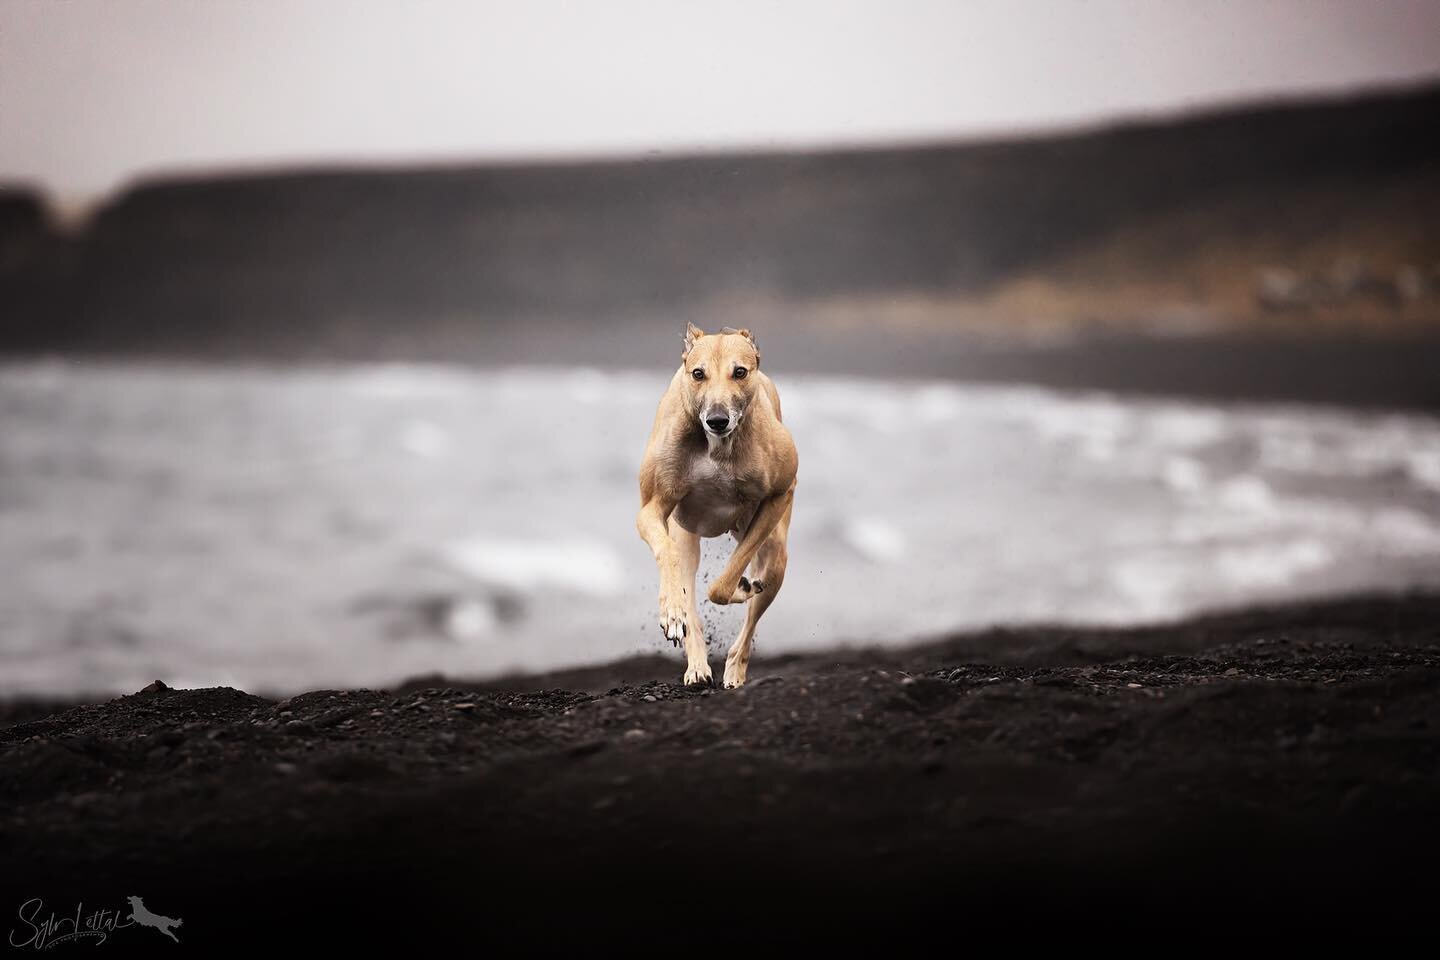 Nina on the run @ Kleifarvatn 😍 amazing photo from @sylvlettal_dogphotography 

#greyhound #greyhoundlife #greyhoundoriginal #greyhounds #greyhoundsofinstagram #greyhoundlove #greyhounds #greyhoundrunning #running #runner #dogphotography #iceland #k